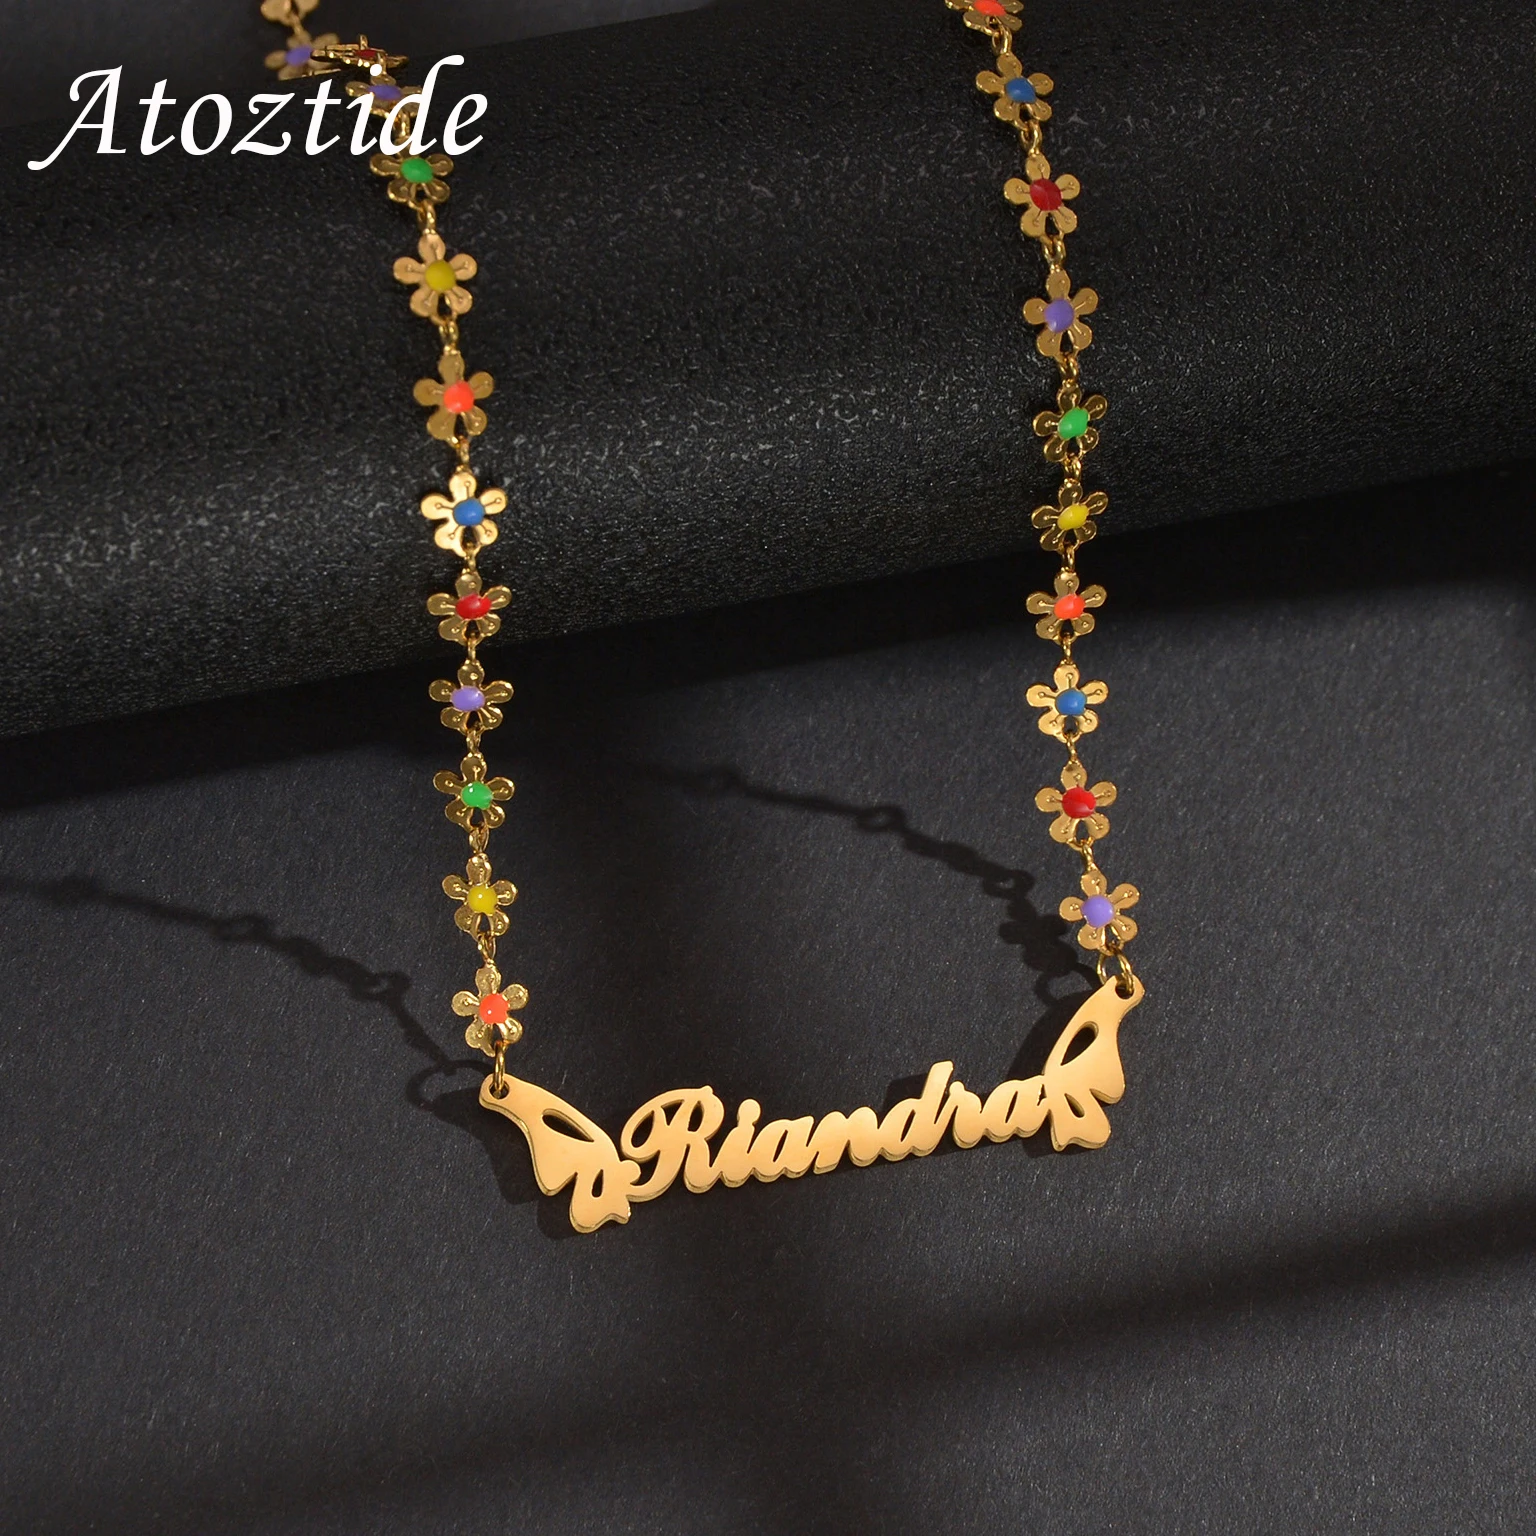 Atoztide Personalized Custom Name Necklace for Women Oil Flower Link Chain Stainless Steel Letter Fashion Pendant Jewelry Gift bowith custom link for our dear customer